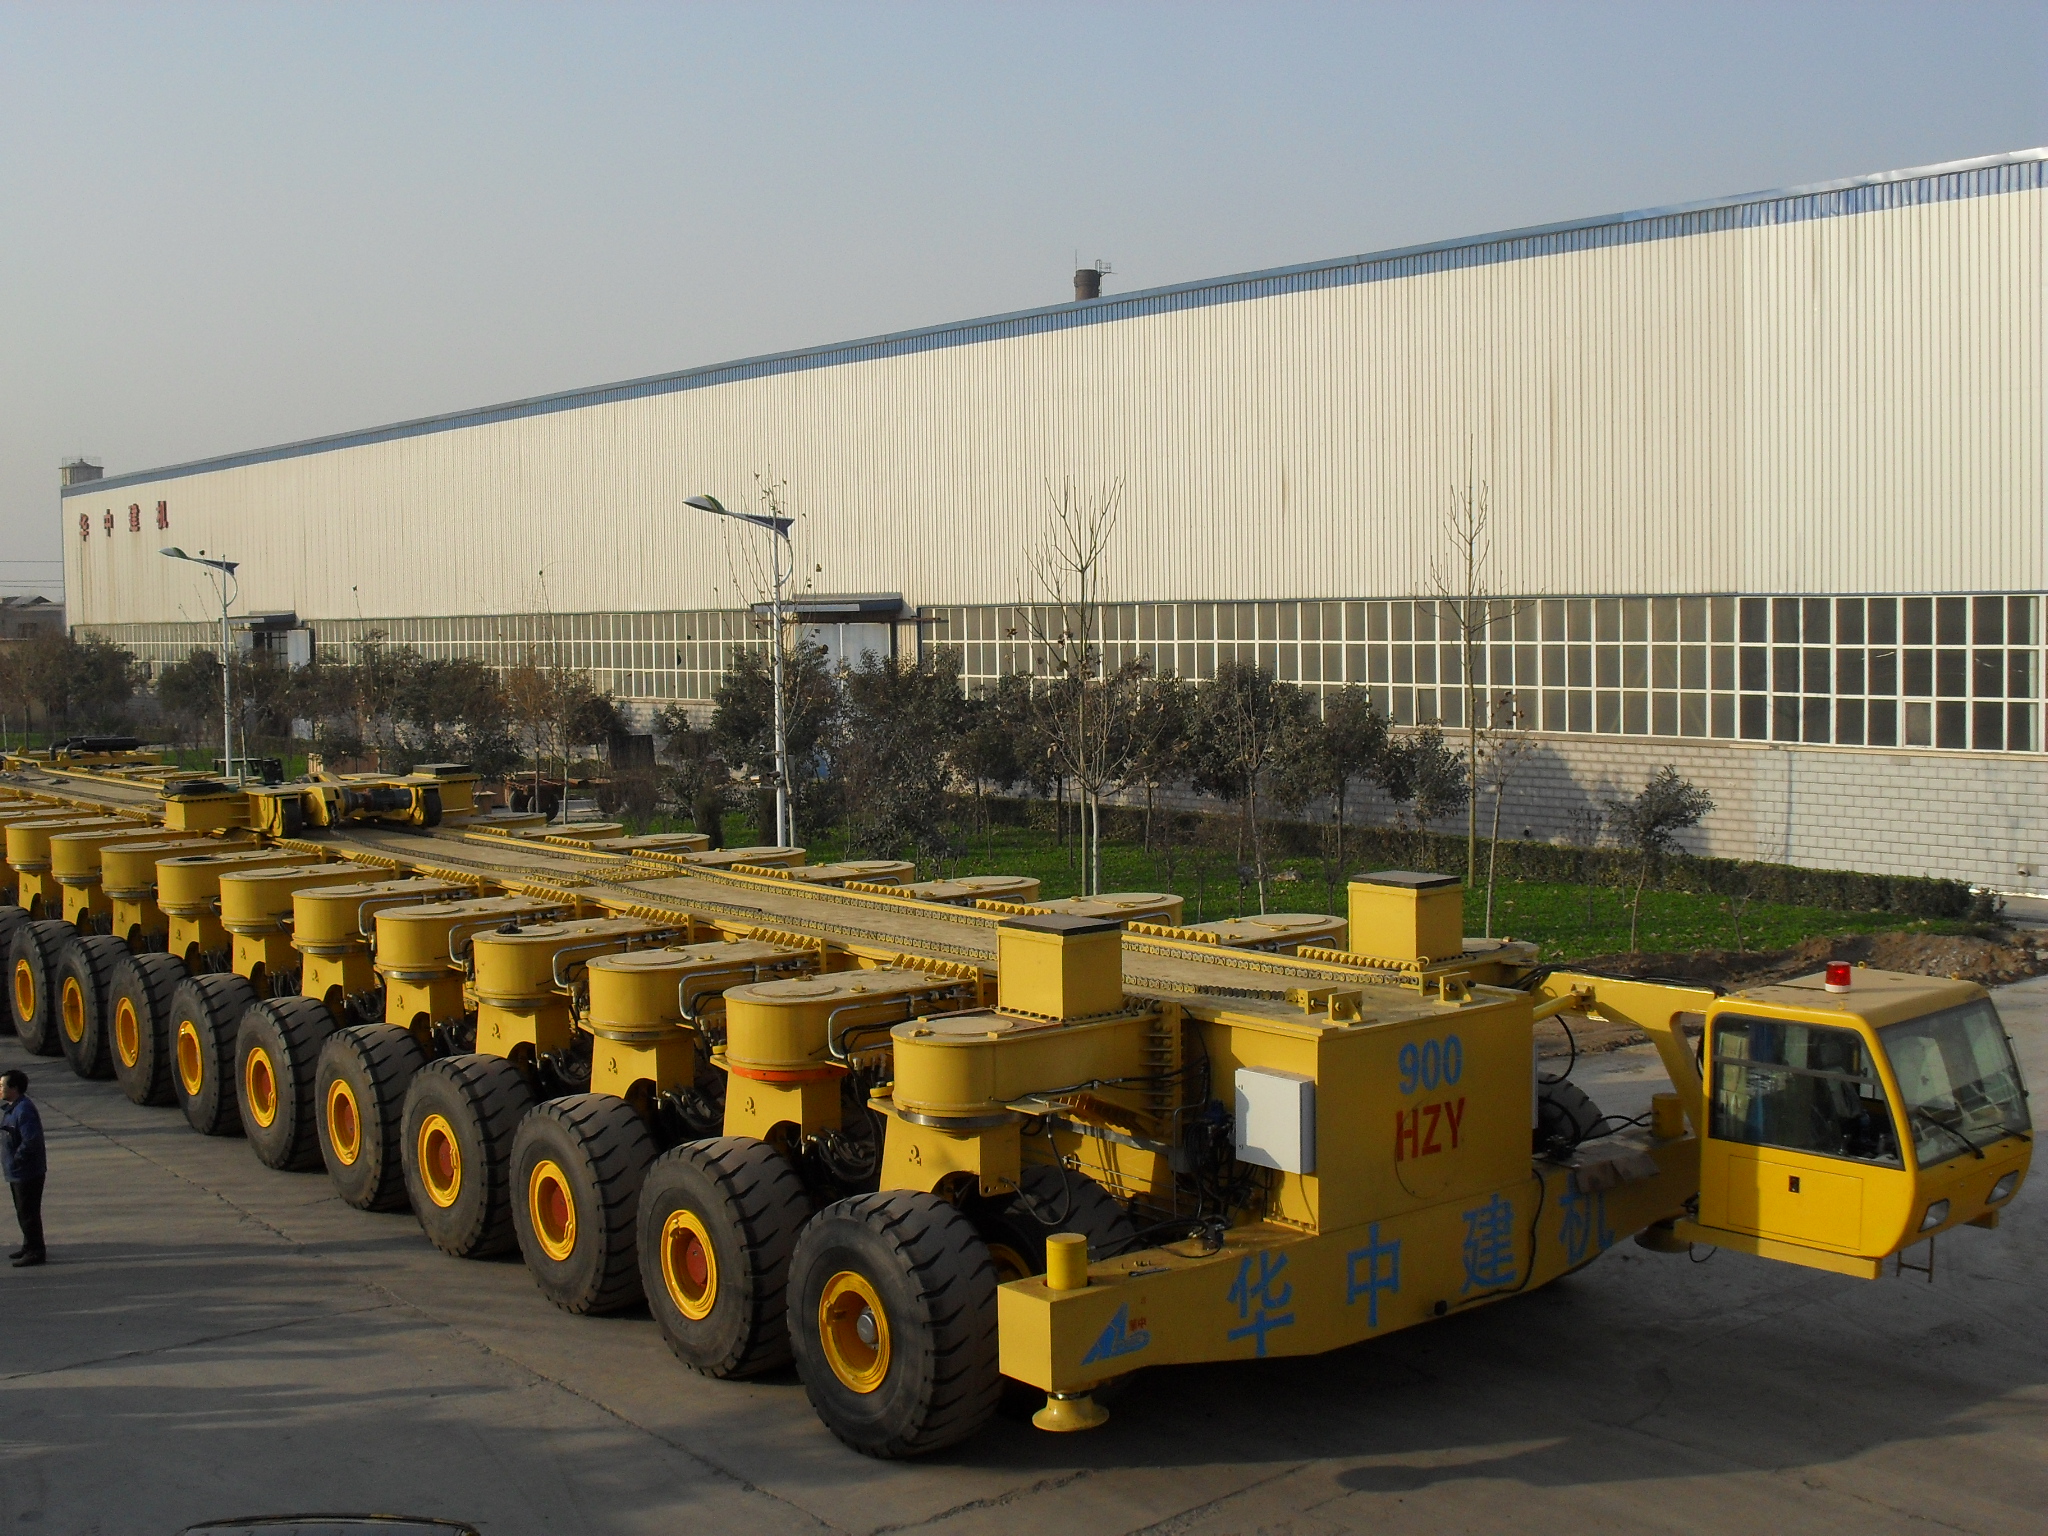 HZY900t Girder Carrying Vehicle